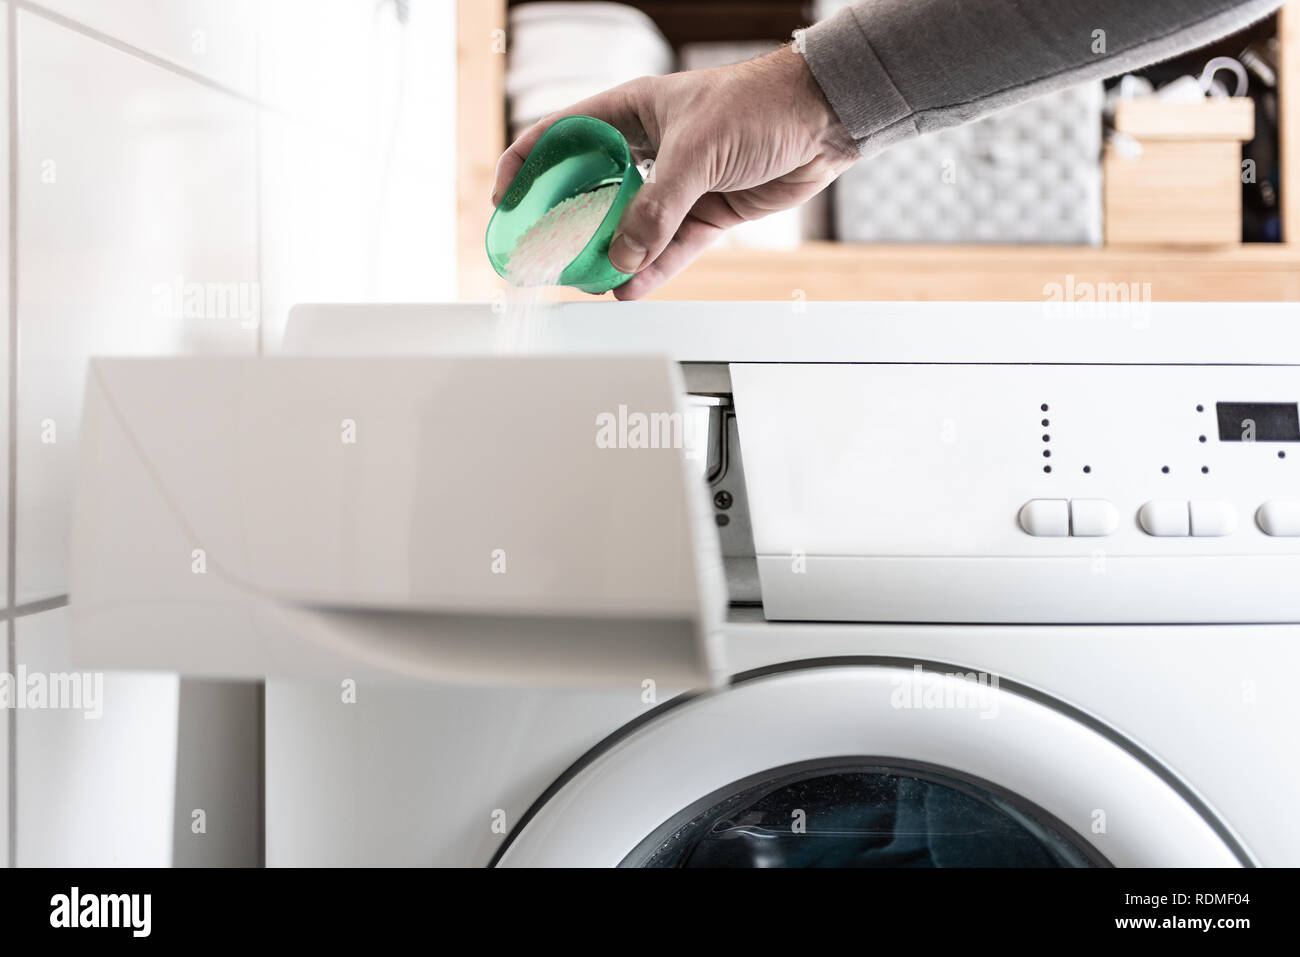 person using dosing aid to pout laundry detergent powder into washing machine Stock Photo